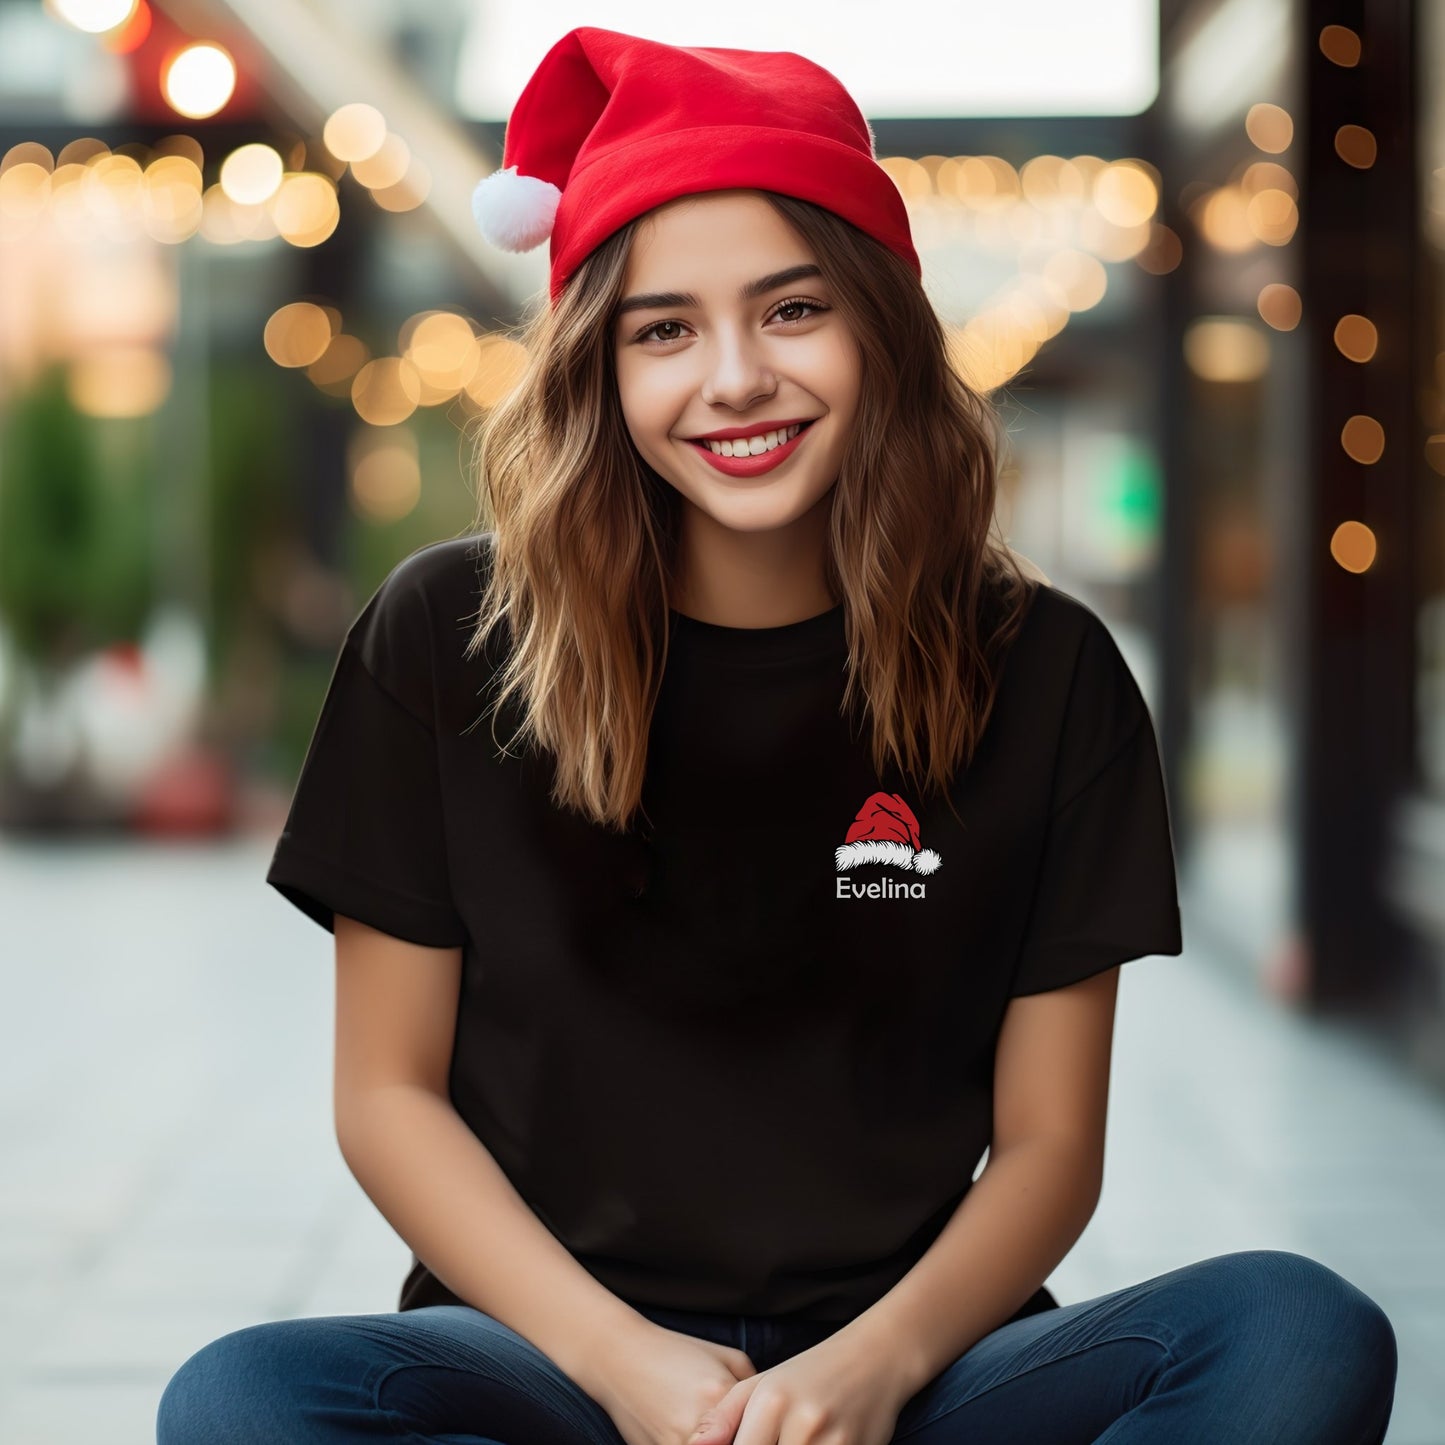 Unisex Personalized Christmas T-Shirt: Christmas Hat With Lettering